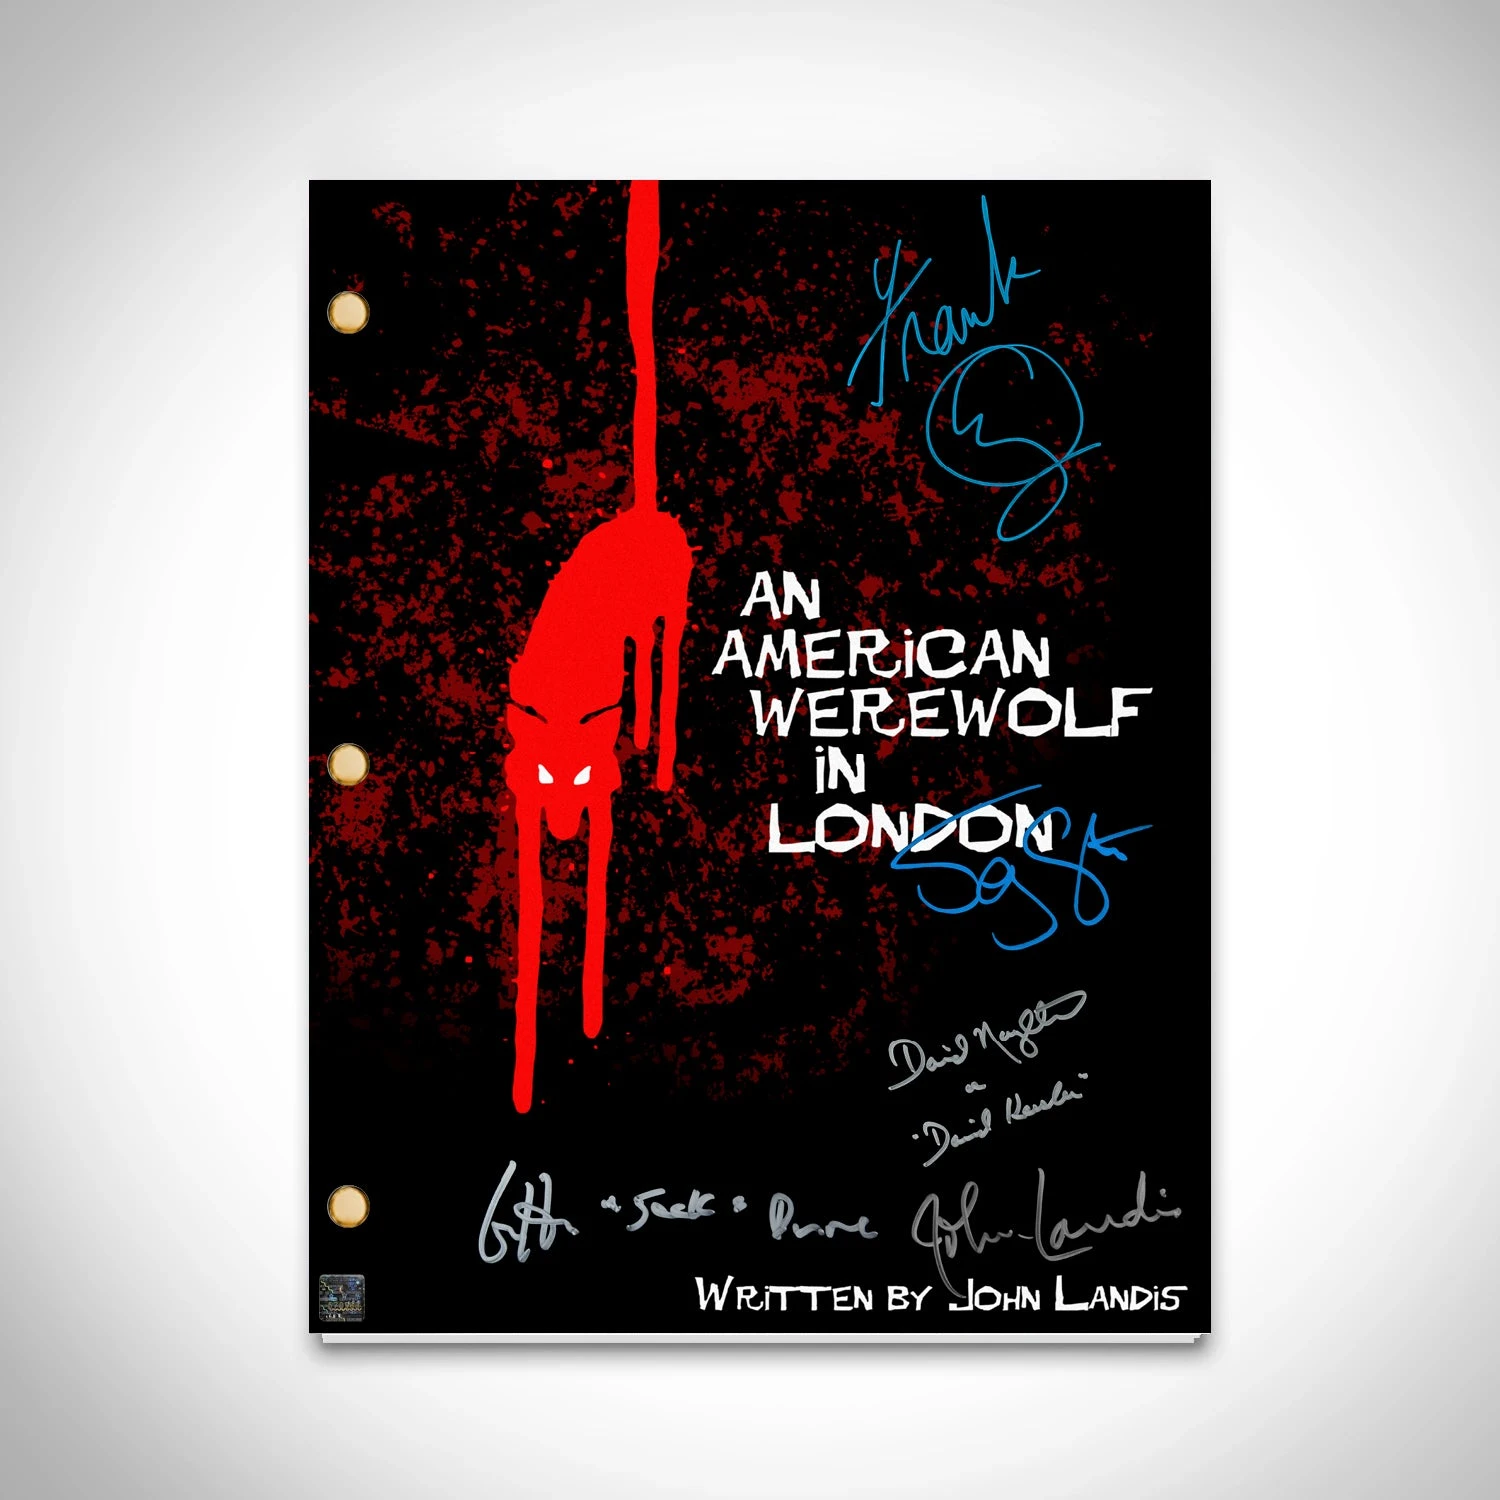 An American Werewolf in London Script Limited Signature Edition - $120.73